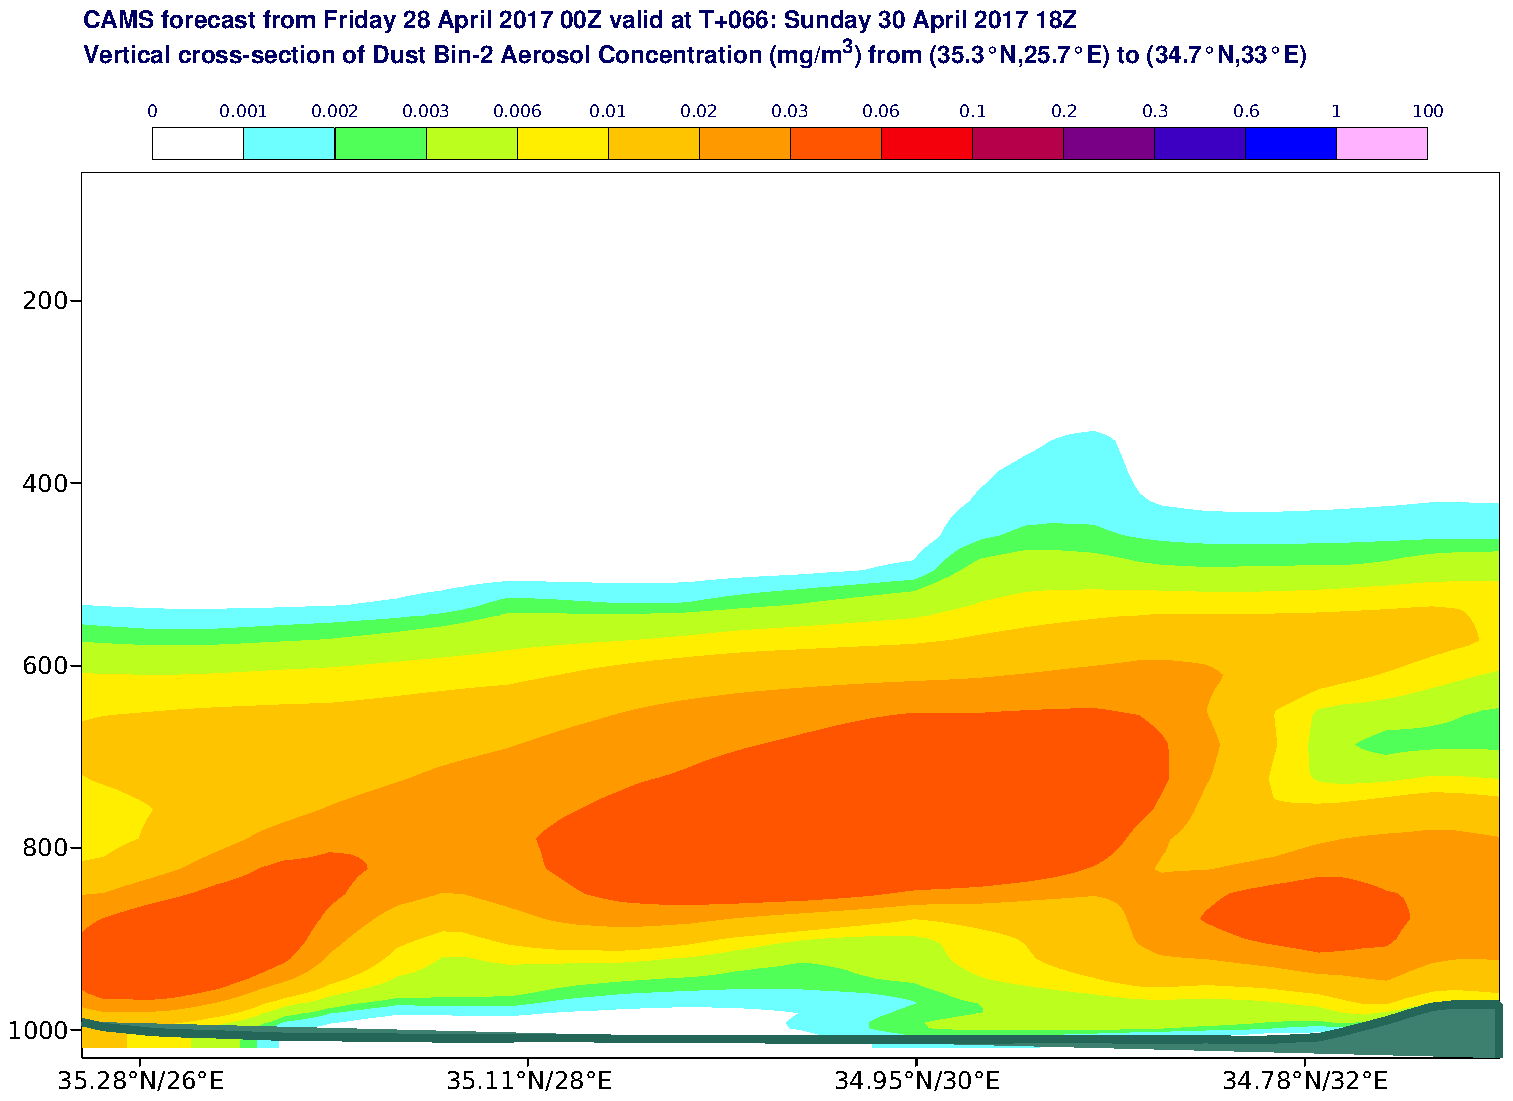 Vertical cross-section of Dust Bin-2 Aerosol Concentration (mg/m3) valid at T66 - 2017-04-30 18:00